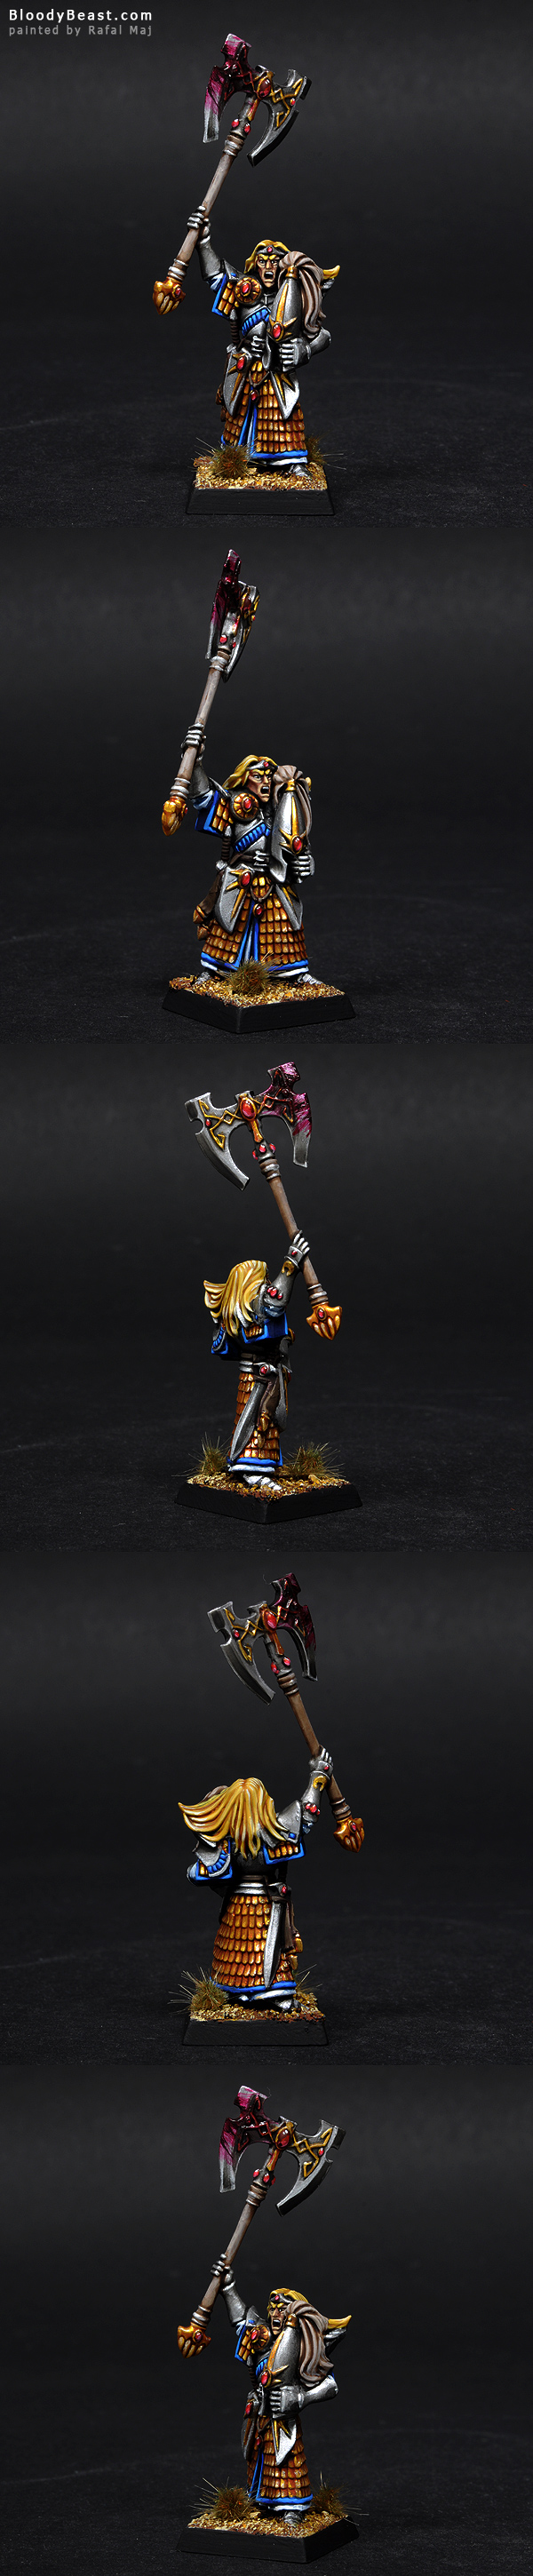 High Elves Prince with Great Axe painted by Rafal Maj (BloodyBeast.com)